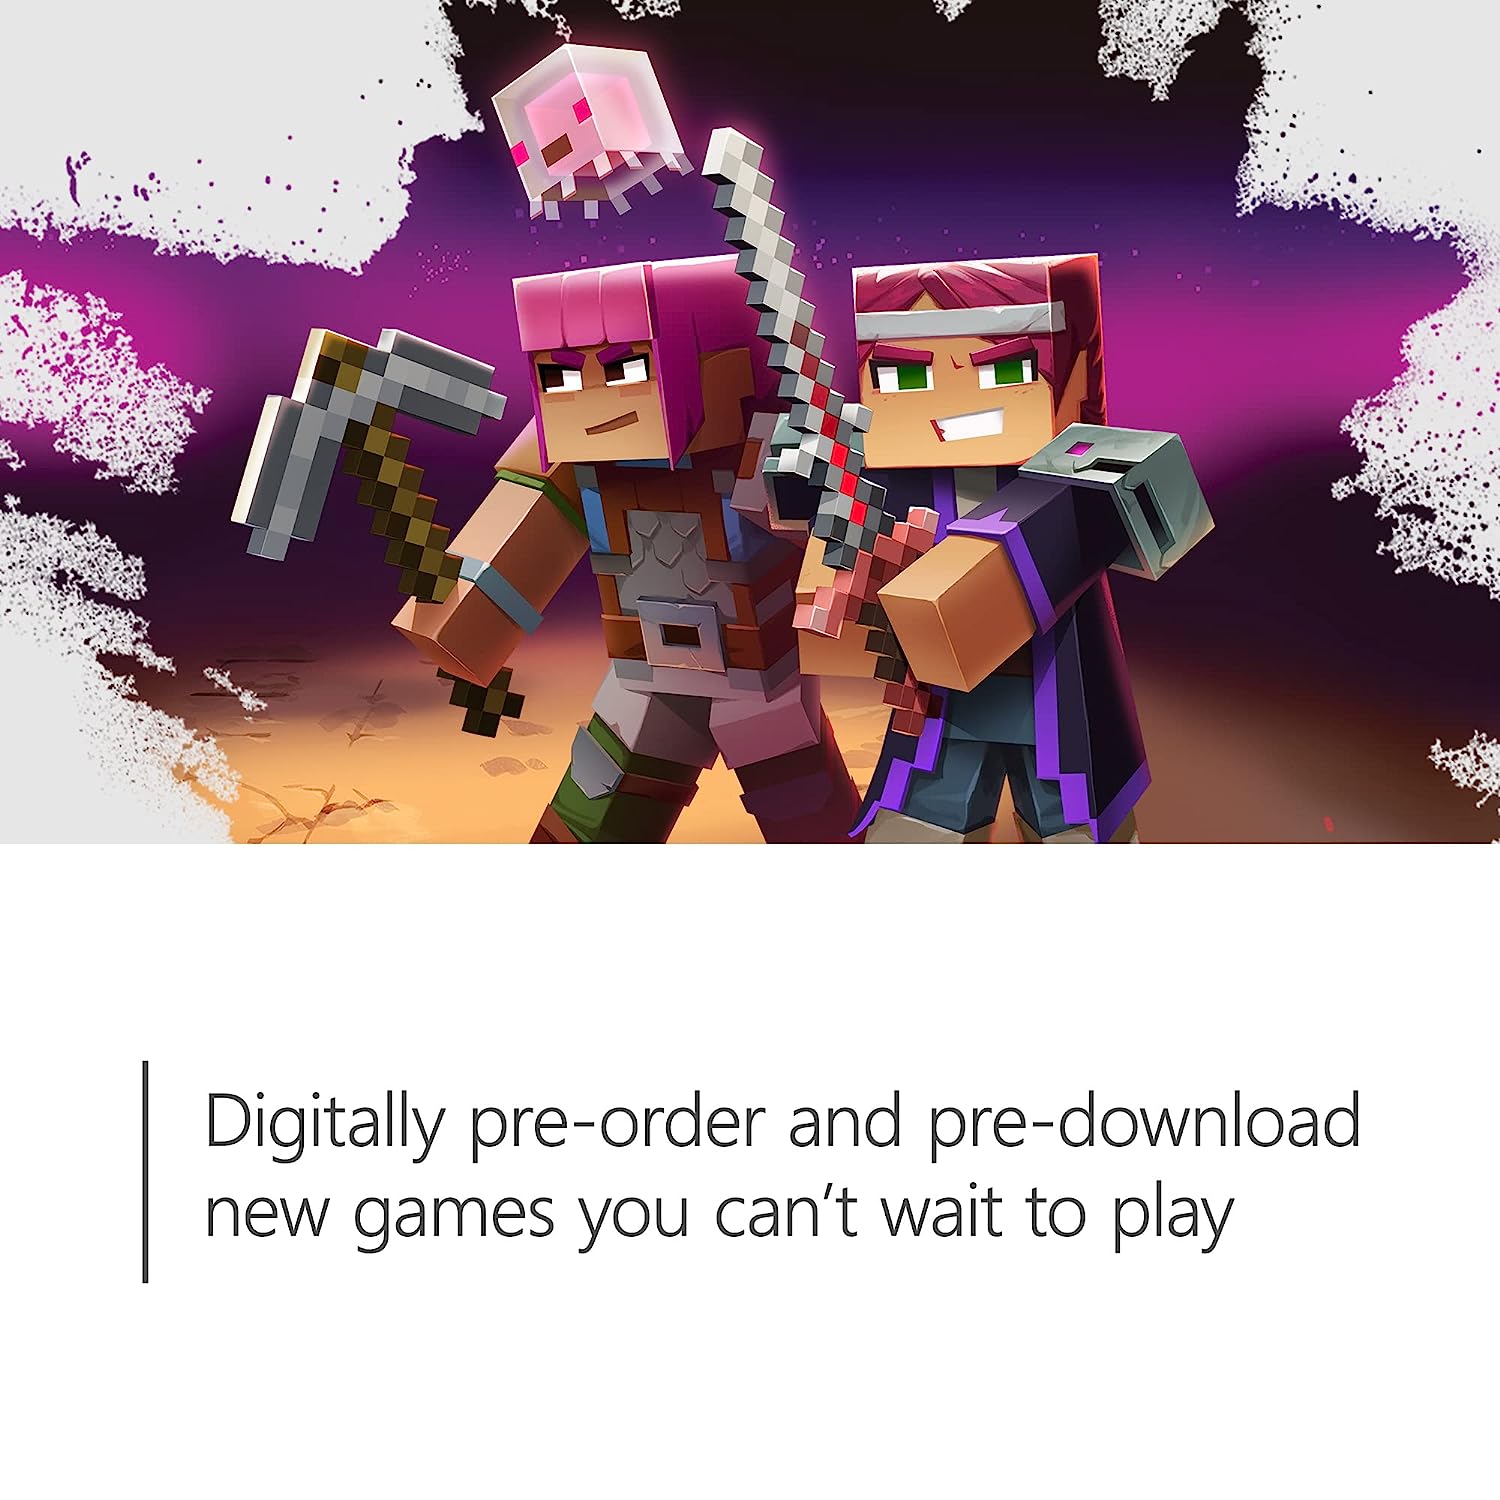 $25 Xbox Digital Gift Card | Digitally pre-order and pre-download new games you can't wait to play.